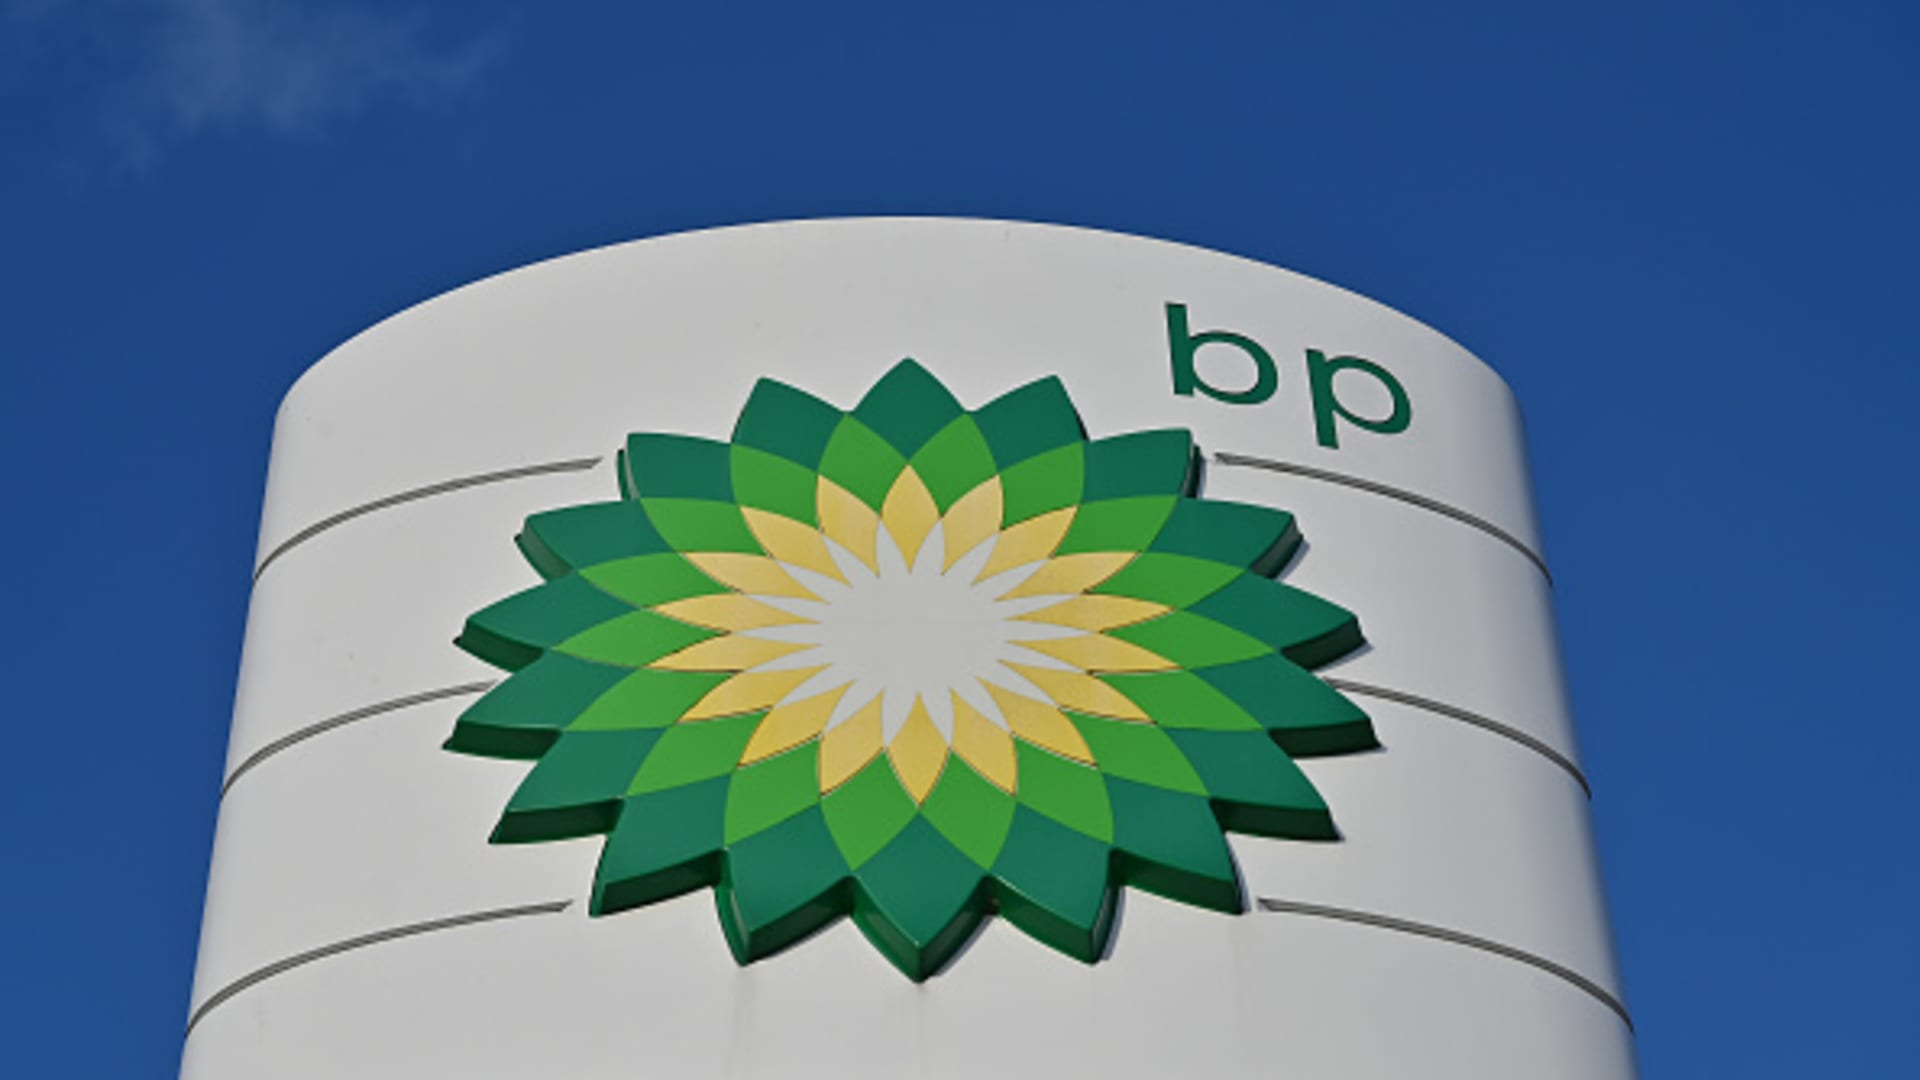 BP exec’s husband guilty of insider trading $1.8 million, snooped on her calls